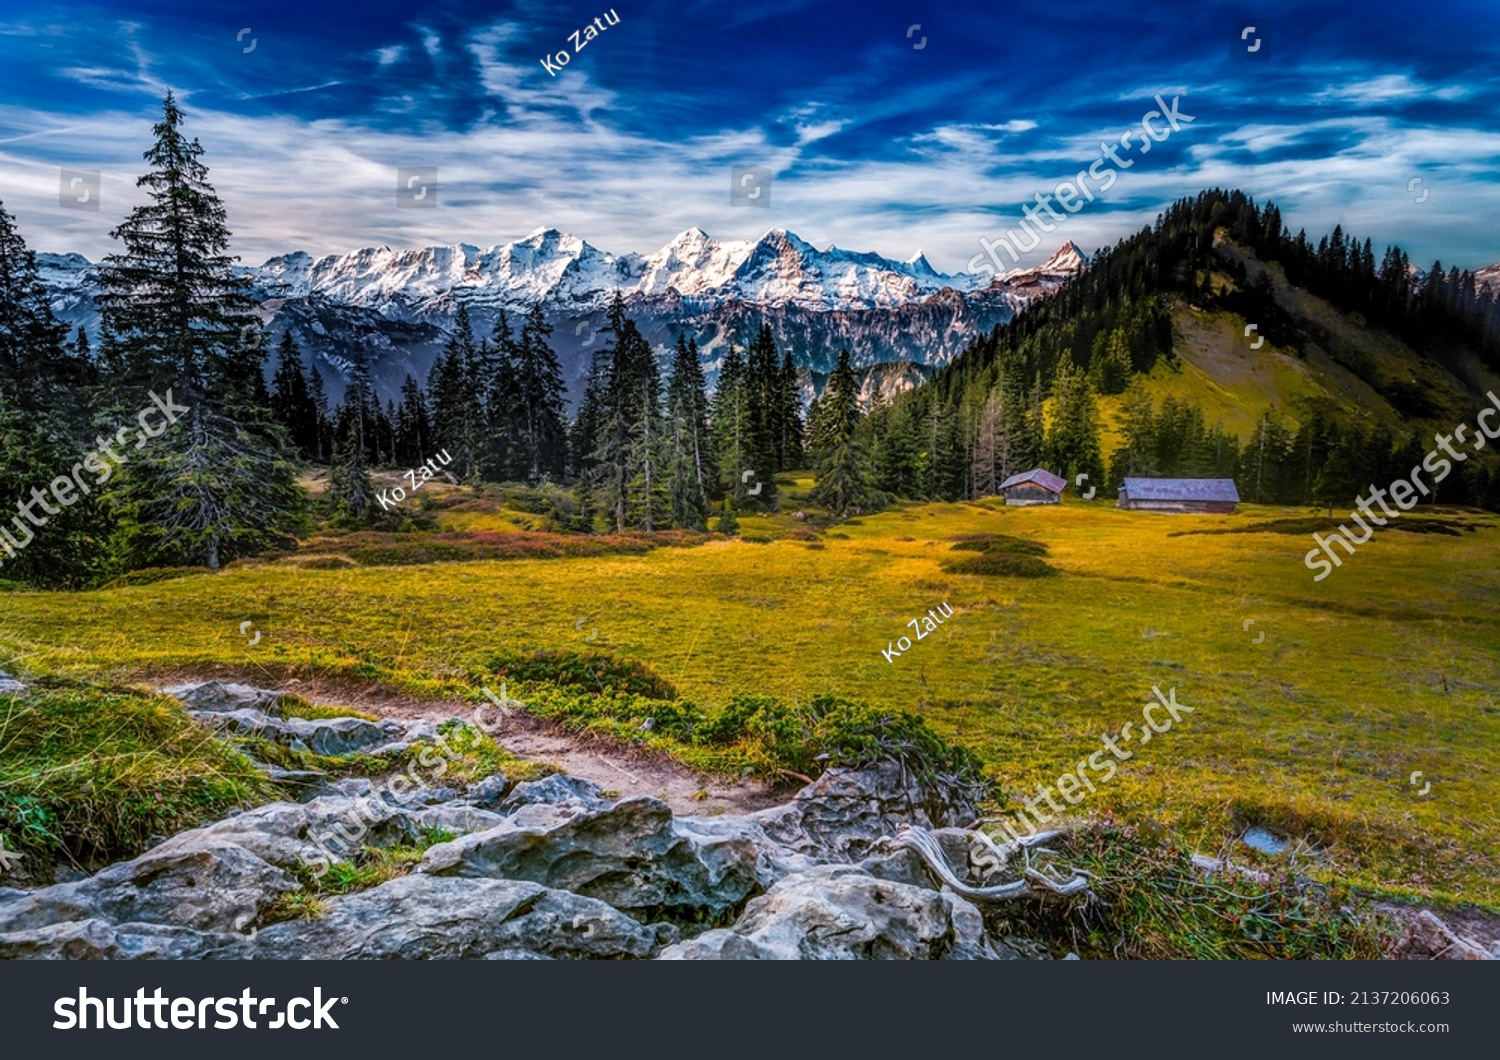 Mountain valley on a clear day. Beautiful valley in mountains. Mountain valley landscape. Snowy mountain peaks background #2137206063